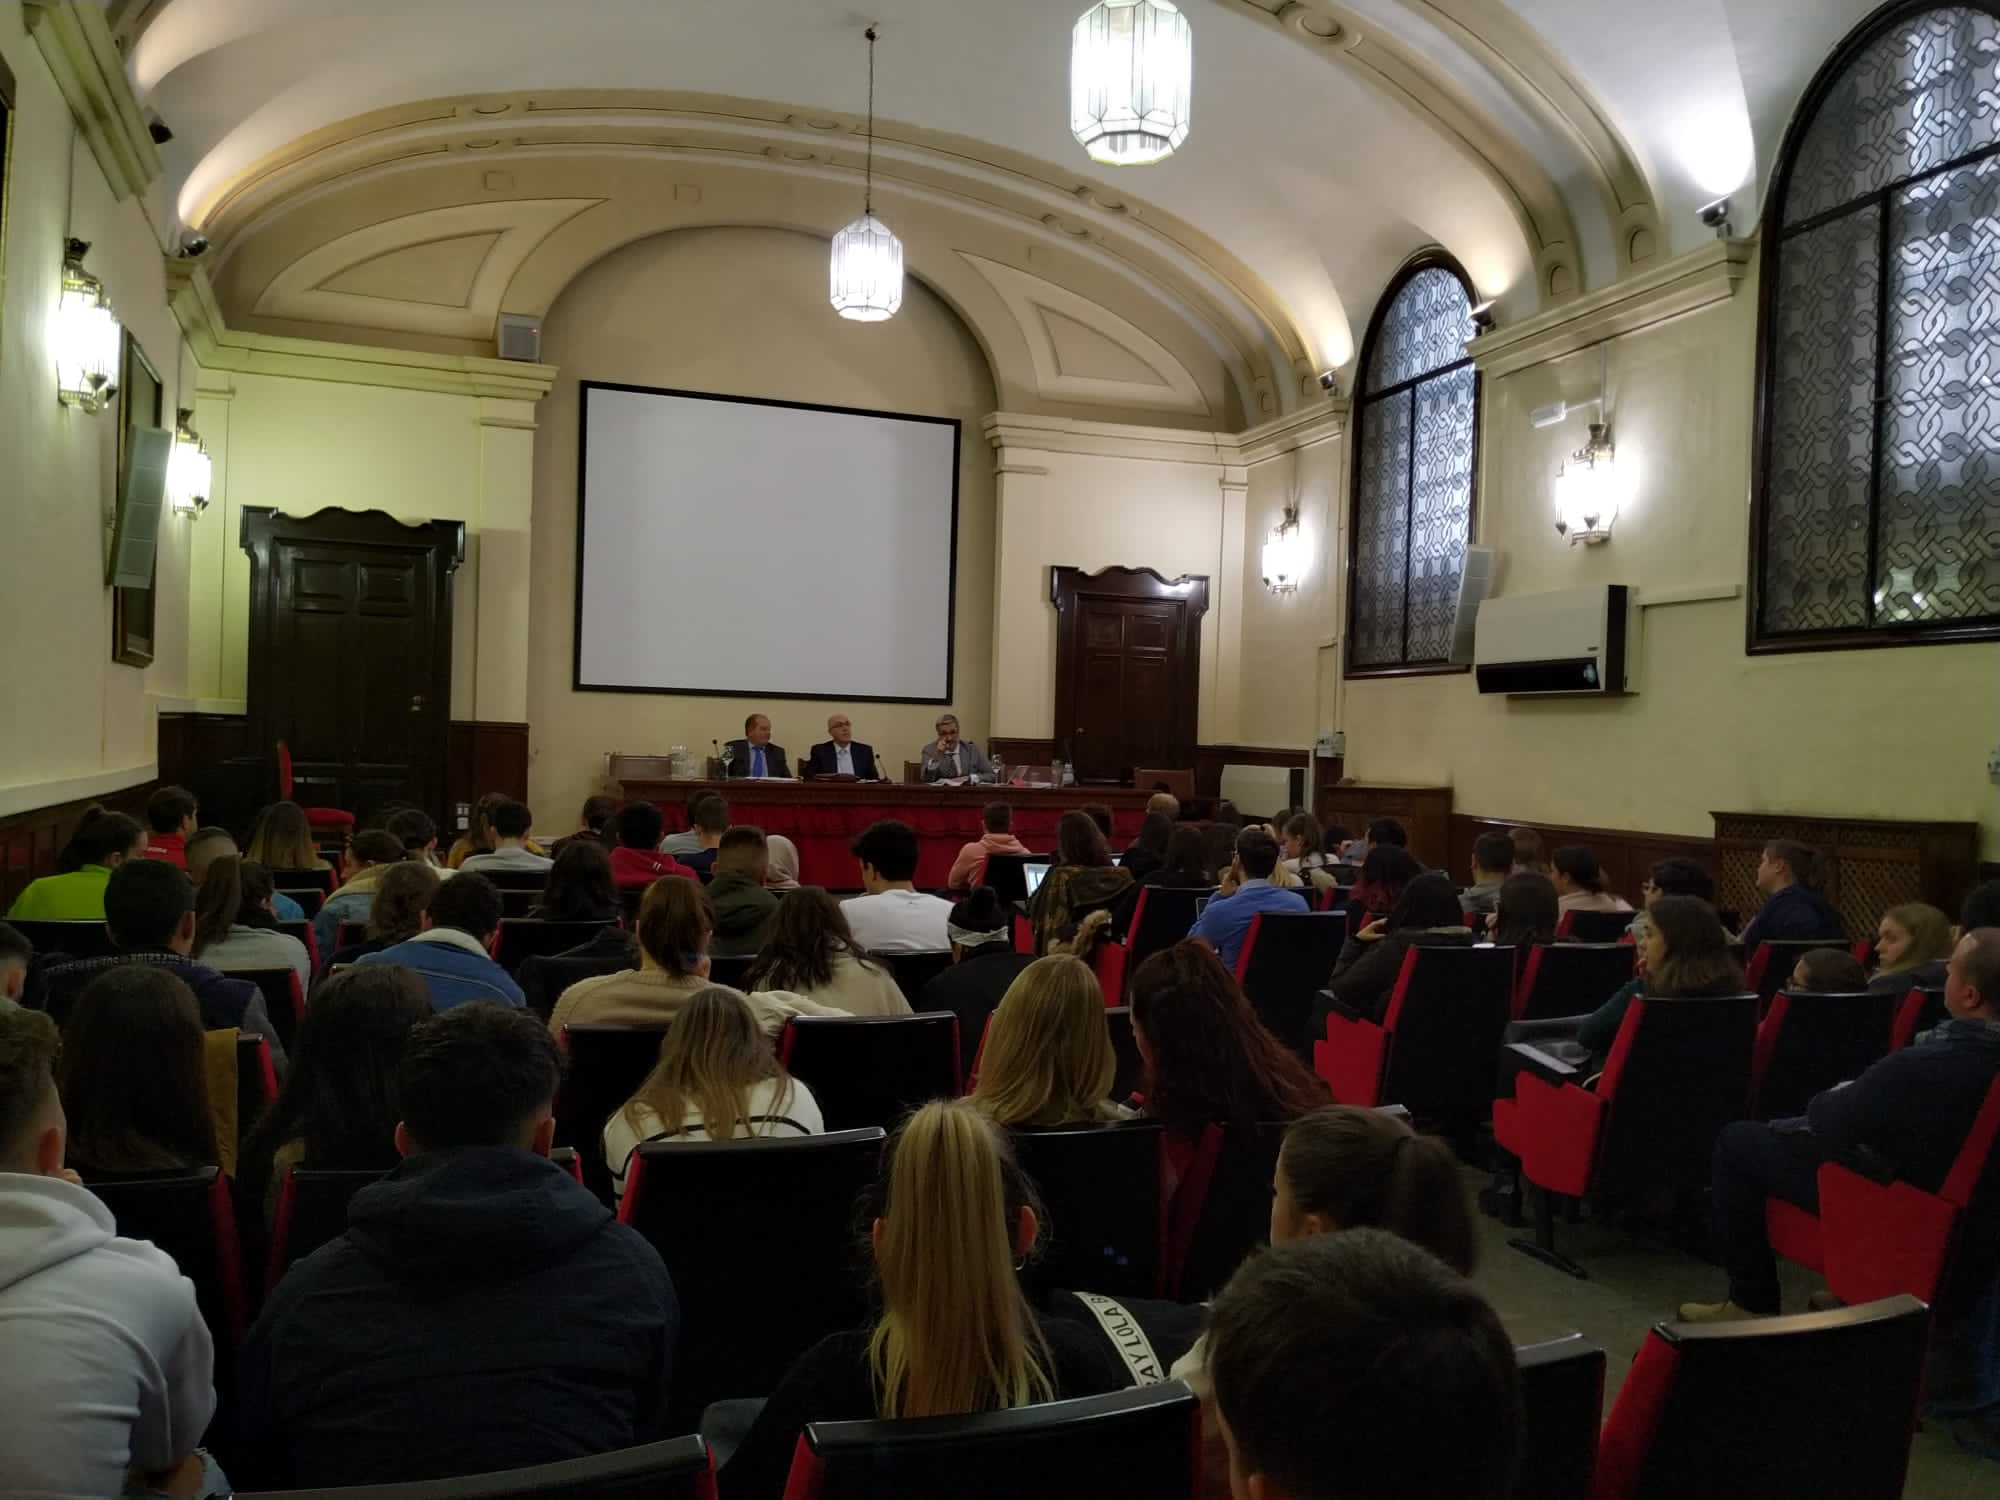 Image taken from the back of the room in which you can see the intervention of professors Carrera Hernández and Martín Rodríguez